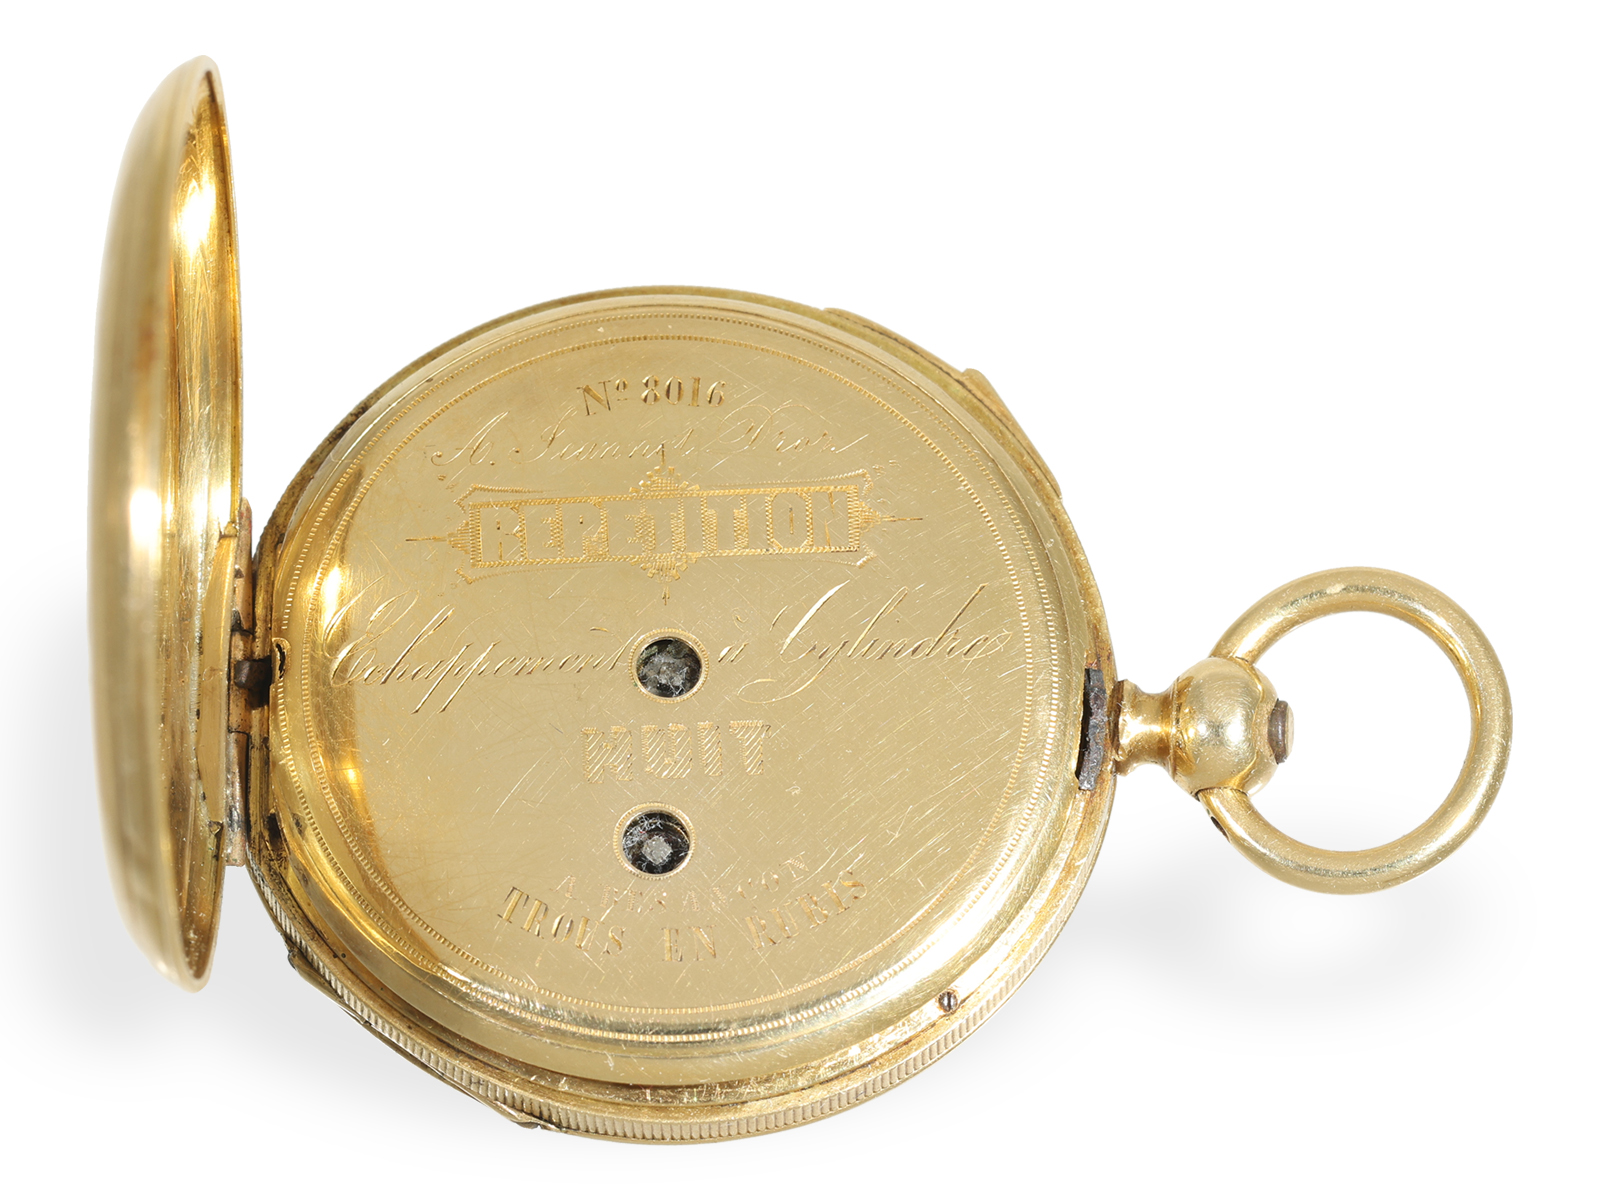 Pocket watch: very rare ladies' pocket watch with repeater, Jeannot Droz a Besancon ca. 1850 - Image 7 of 7